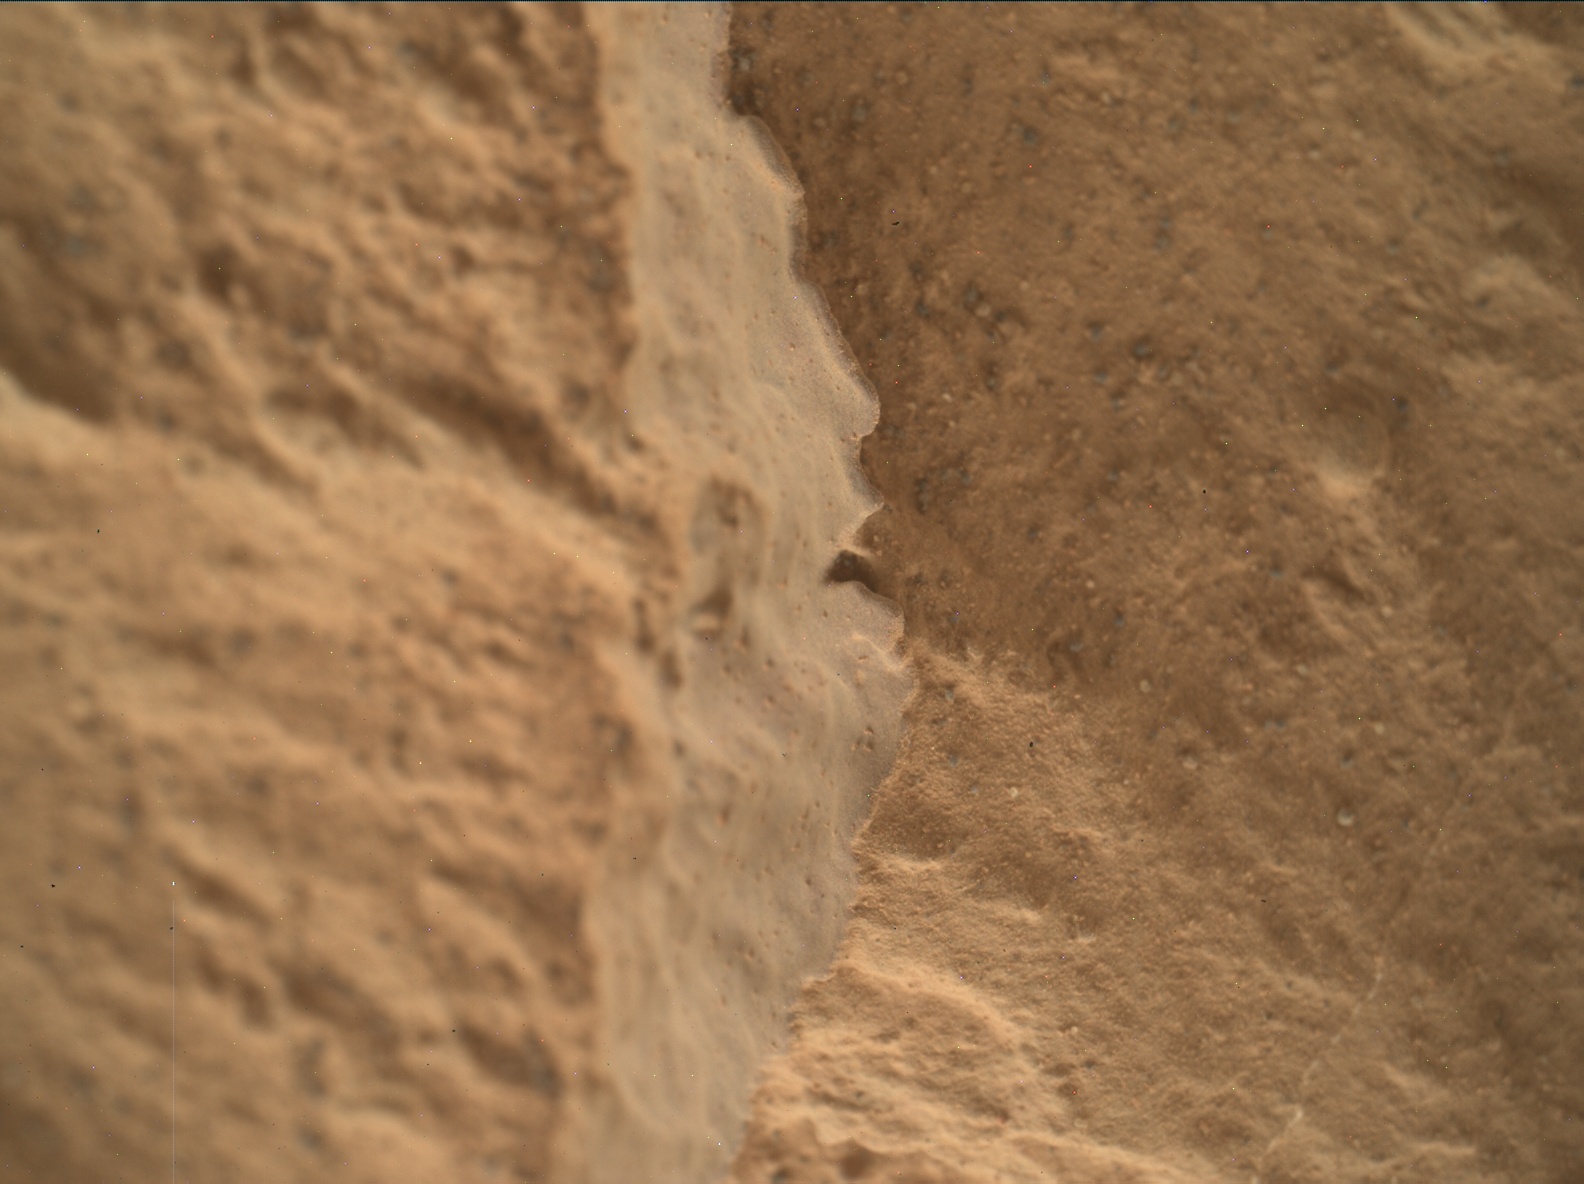 Nasa's Mars rover Curiosity acquired this image using its Mars Hand Lens Imager (MAHLI) on Sol 3187